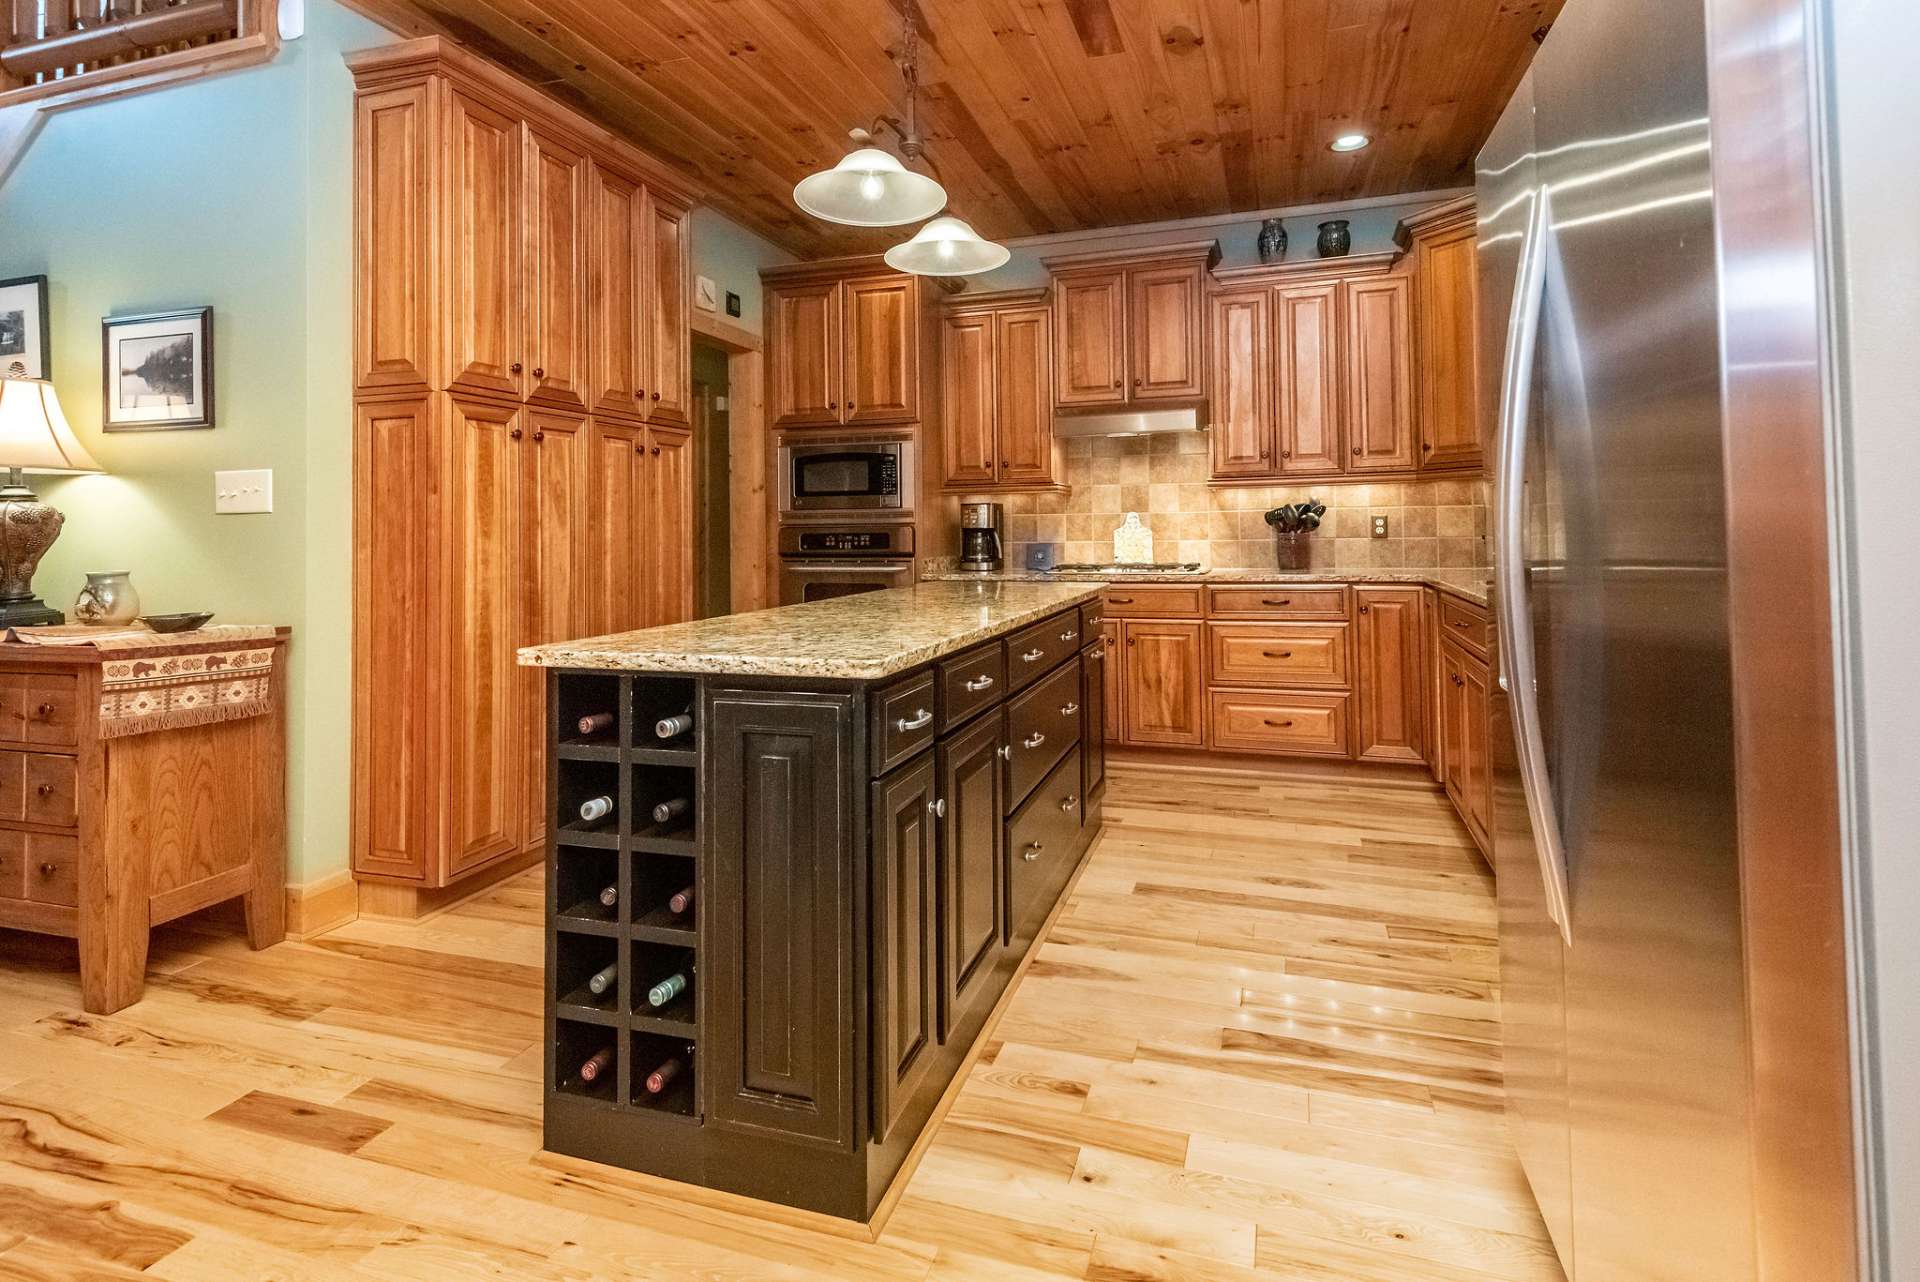 You'll love this accent island offering additional storage and wine rack.